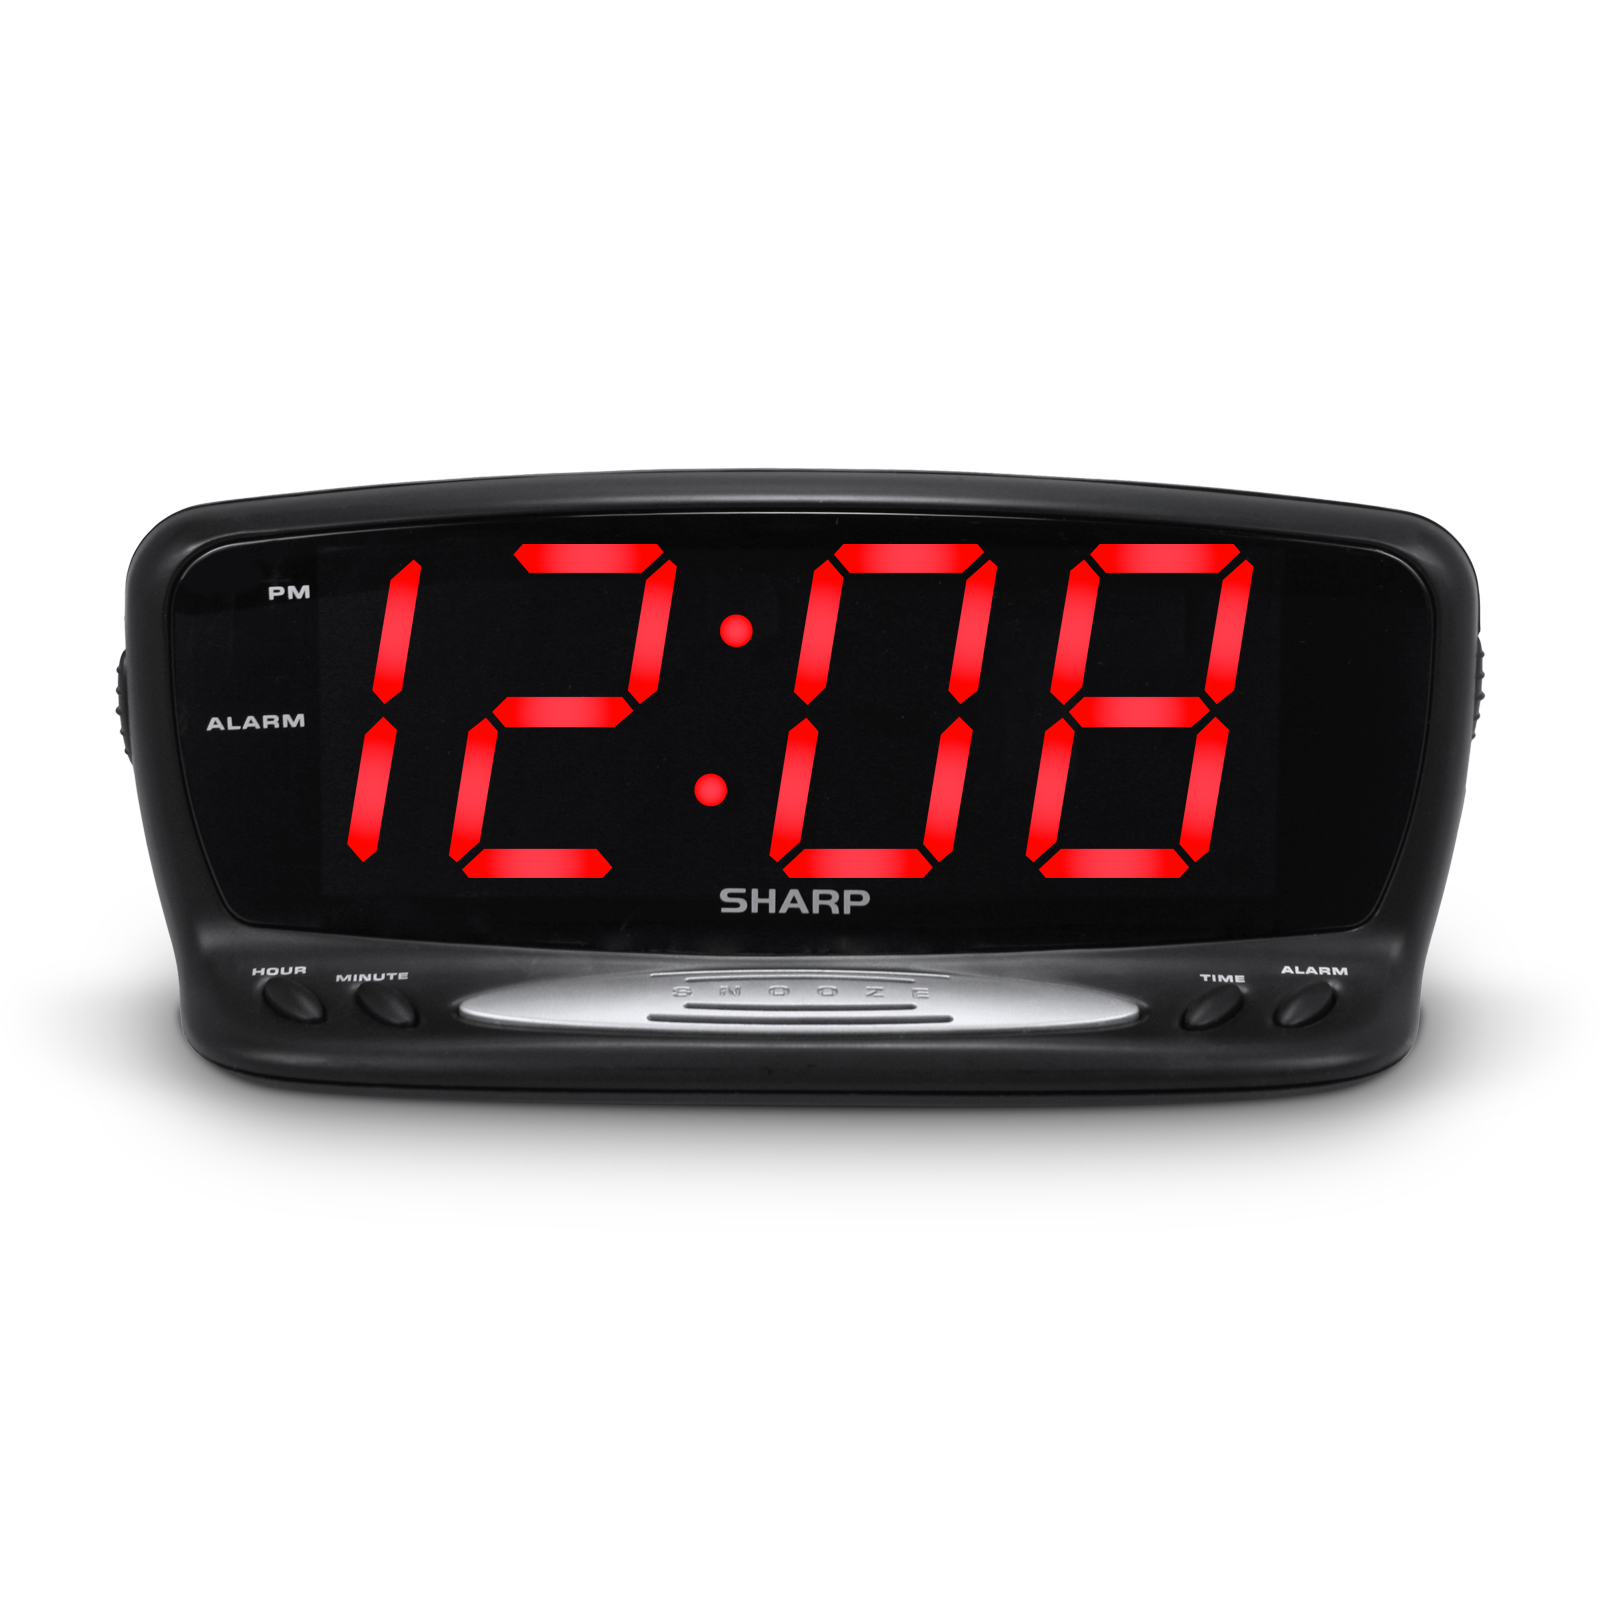 Sharp alarm clock with large 2.0"  red LED display